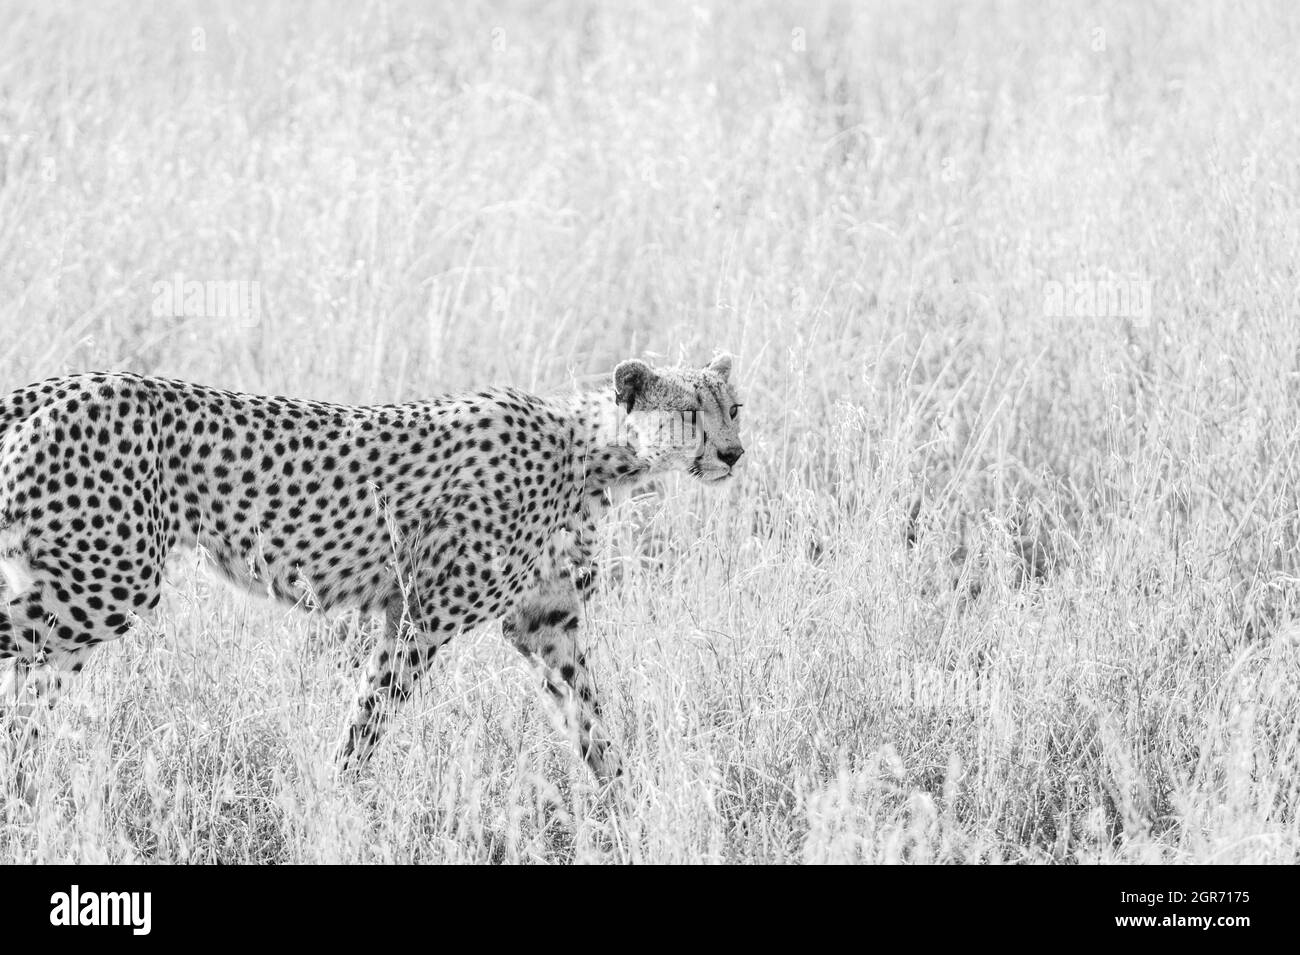 Cheetah view Black and White Stock Photos & Images - Alamy